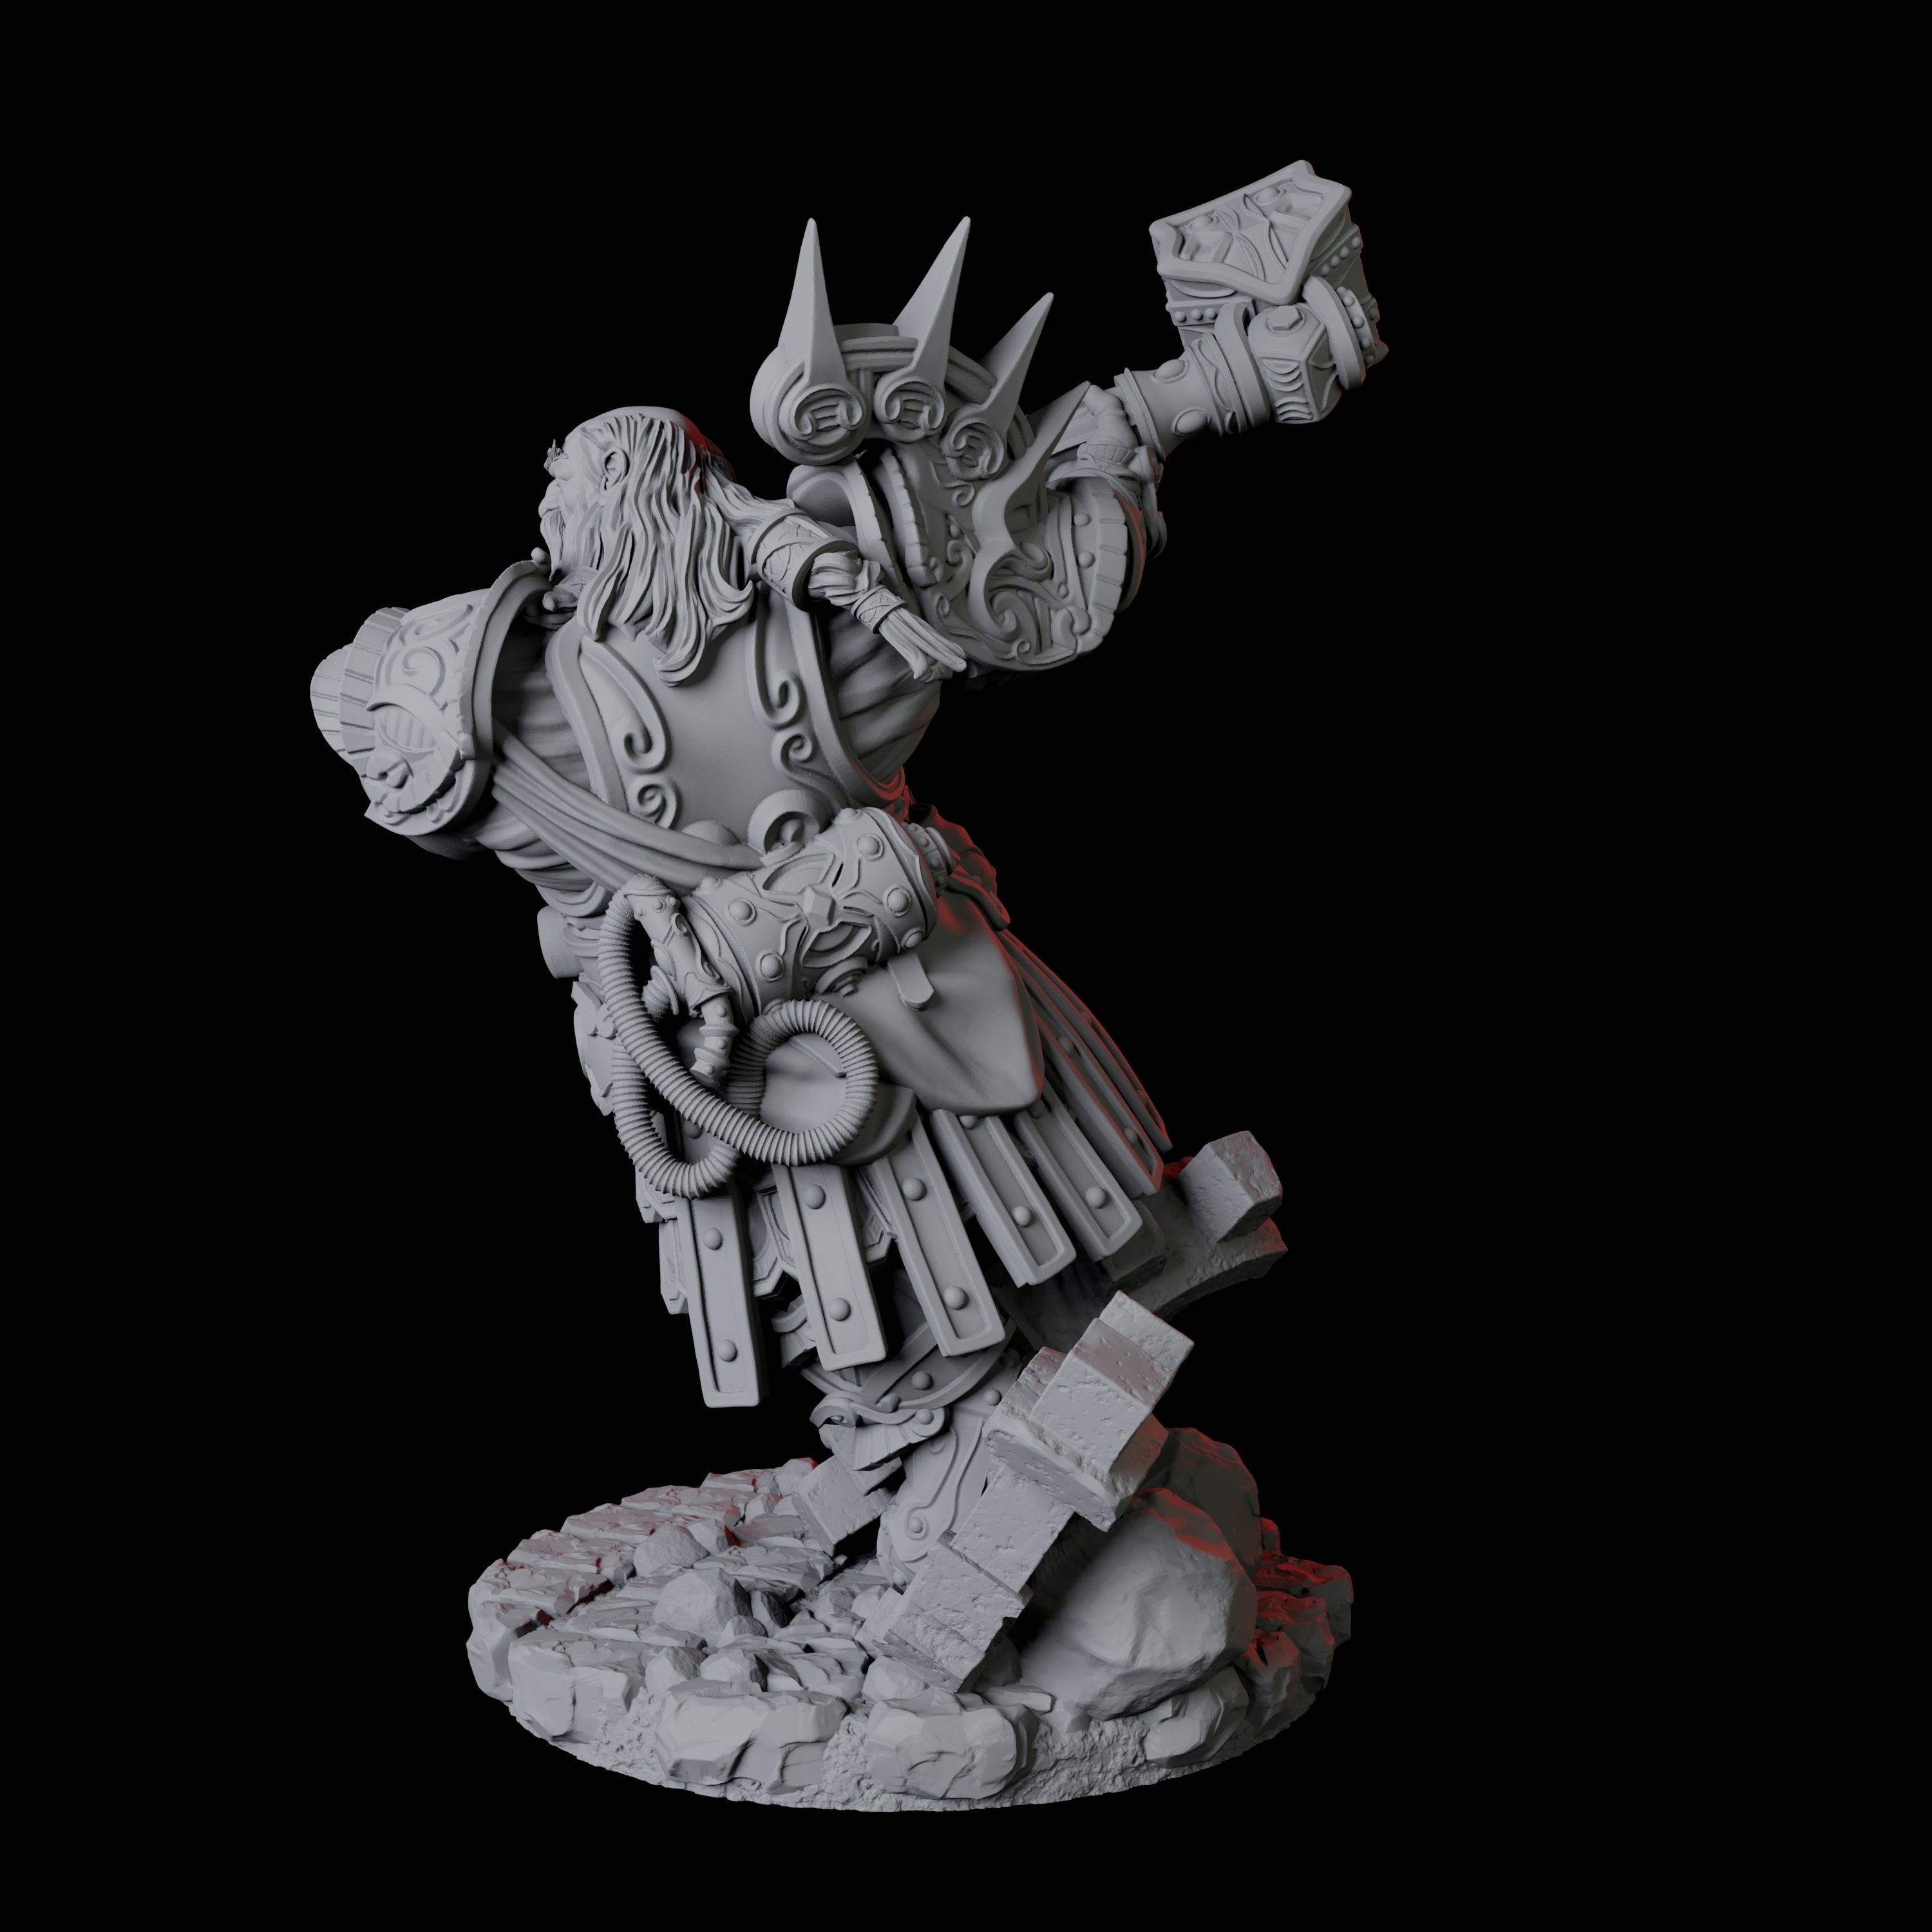 Dwarf Artificer Engineer B Miniature for Dungeons and Dragons, Pathfinder or other TTRPGs